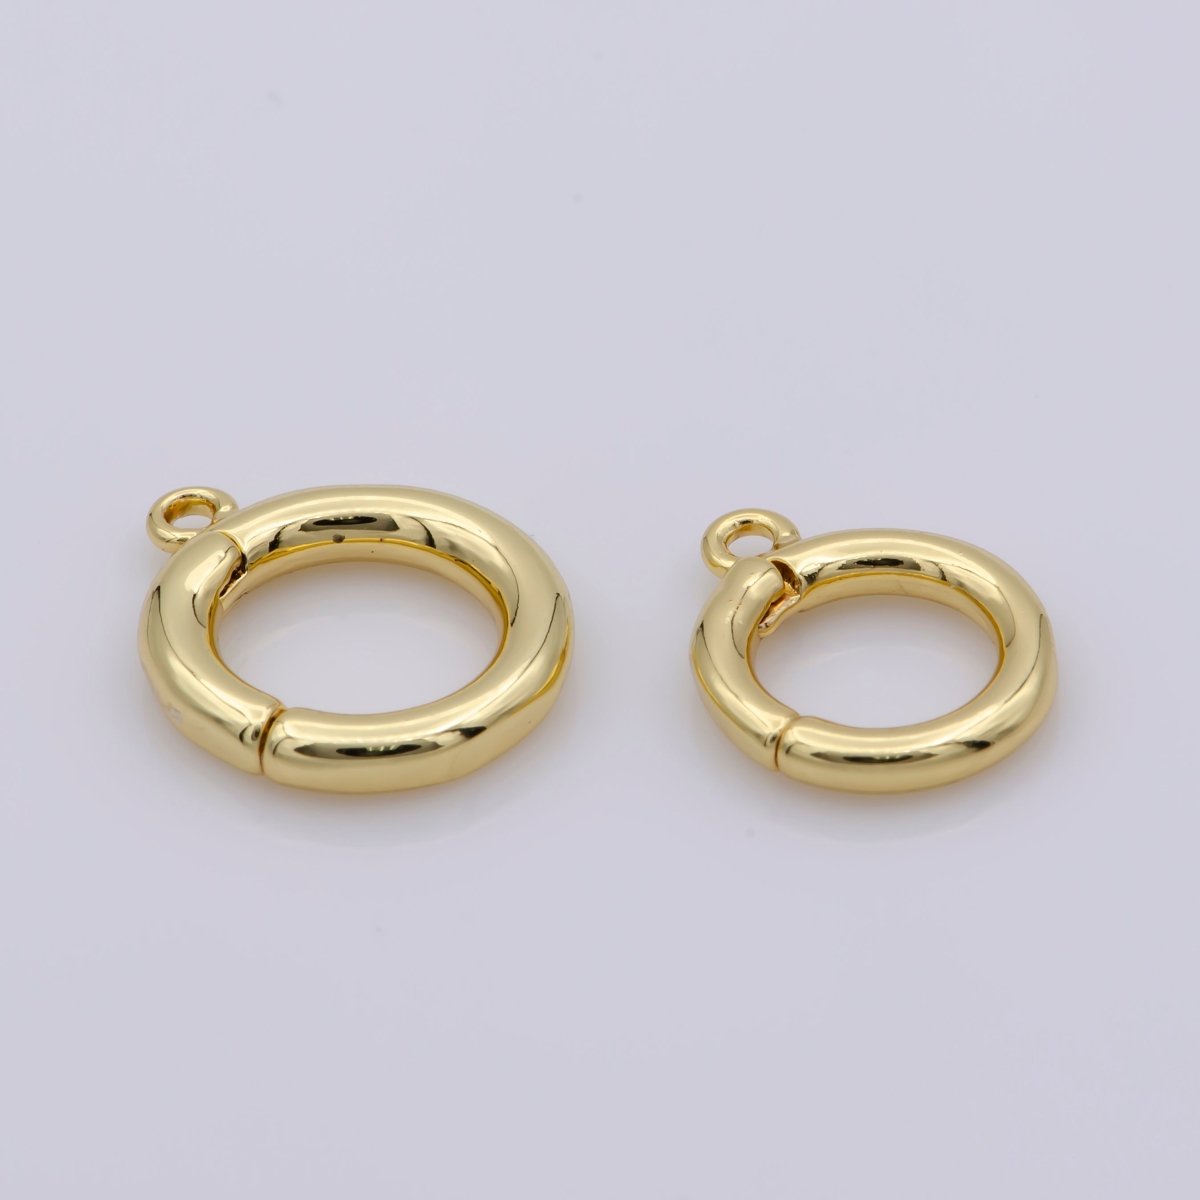 10mm, 12mm Gold Clicker Ring Clicker Clasp Charm Open Link Holder Clicker Clasp Jewelry Making Supplies Gold Filled Findings K-912 K-913 - DLUXCA